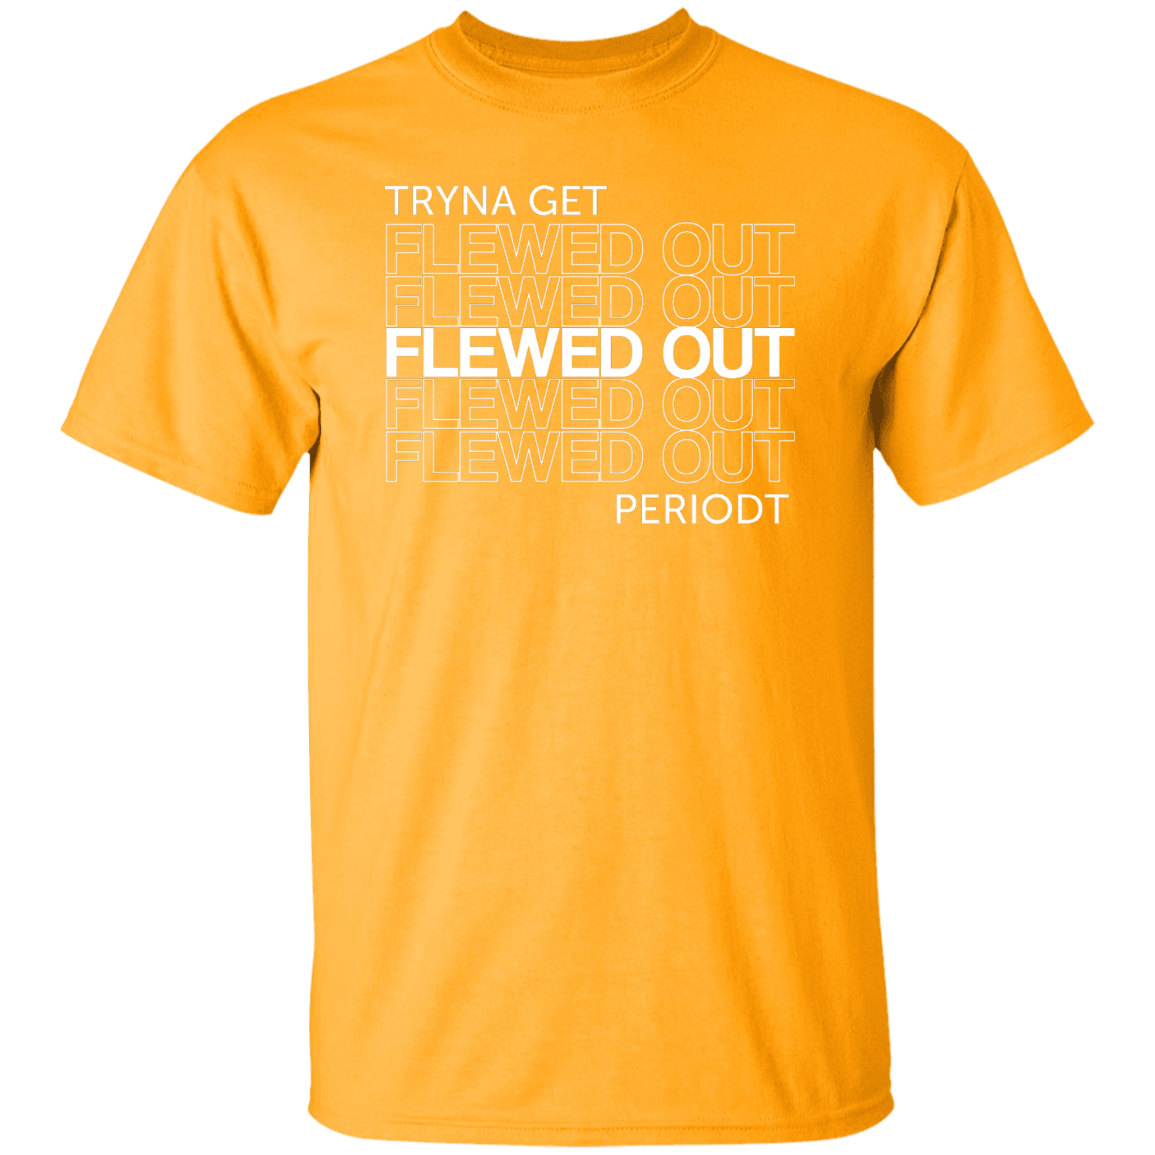 Flewed out-w -  T-Shirt